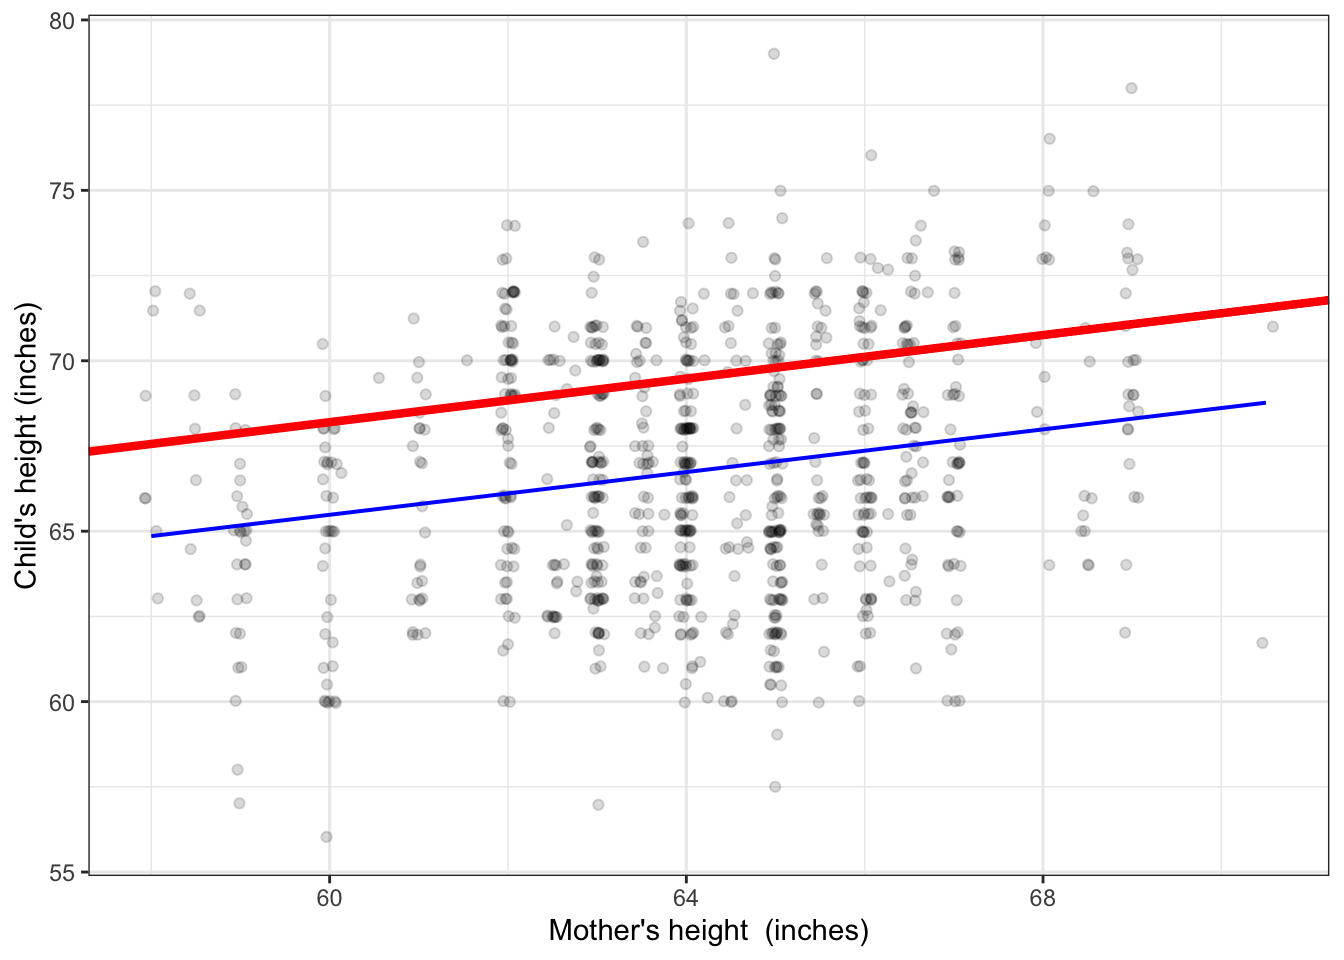 Figure 4.3: The red function is a bad match to the data. The large majority of points are far below the function.   The blue function has the same form -- a straight line -- but is a legitimate match to the data, with data points more or less evenly balanced between being above and being below the blue line.